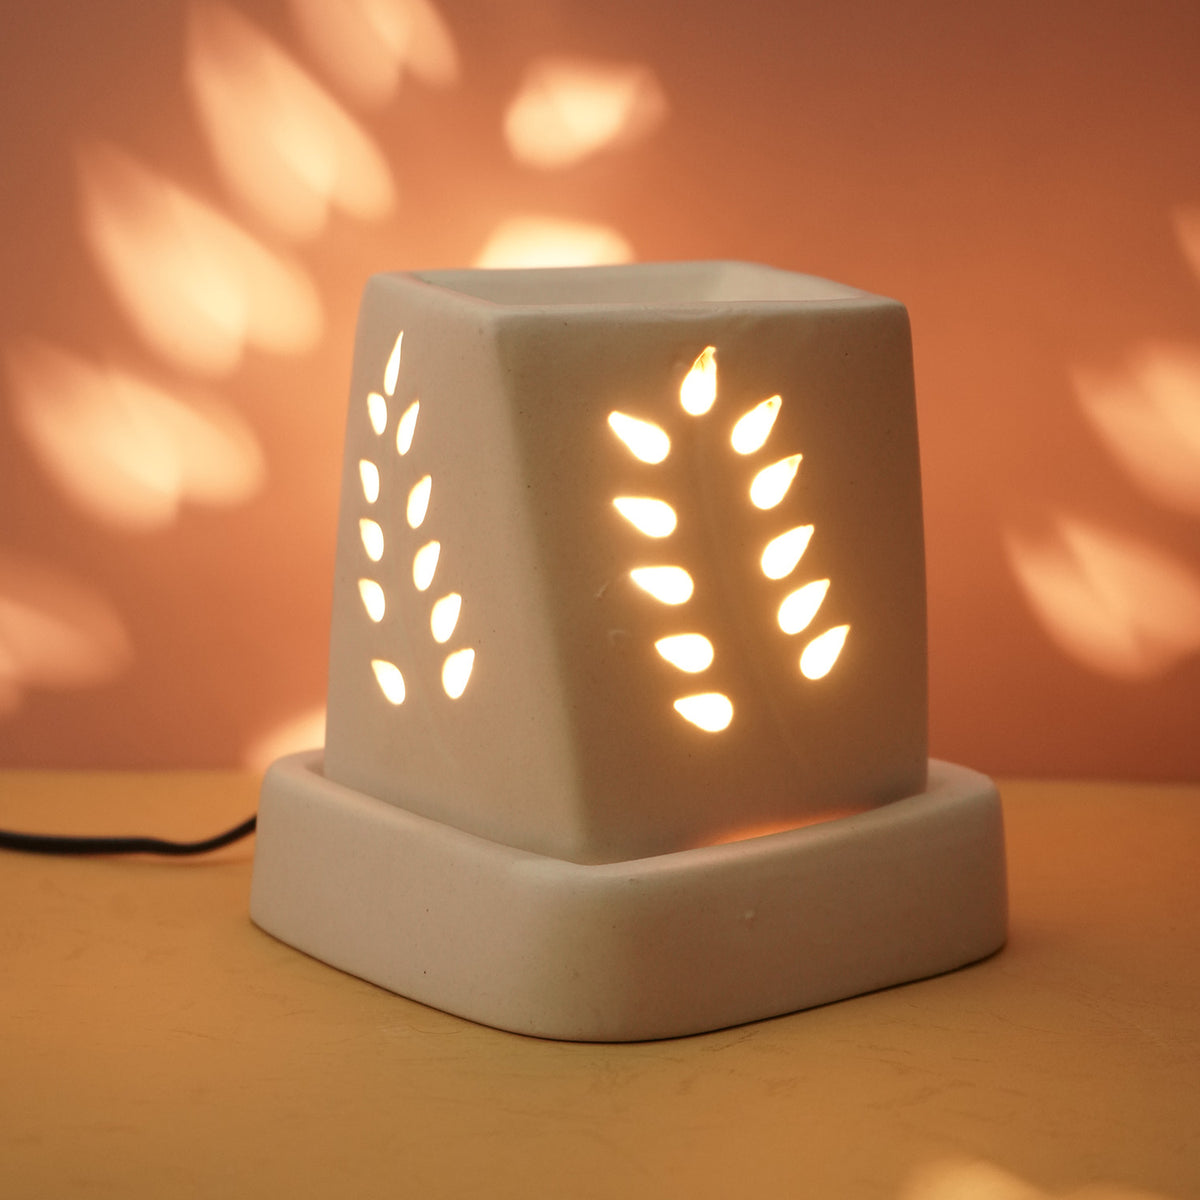 Claymistry Ceramic Electric White Leaves Aroma Lamp Diffuser | 14cm * 14cm * 16cm | Matte Finish | Aroma Oil Burner for Aromatherapy | Home Decor and Fragrance with Aroma Oil (Jasmine Fragrance 10 ml)